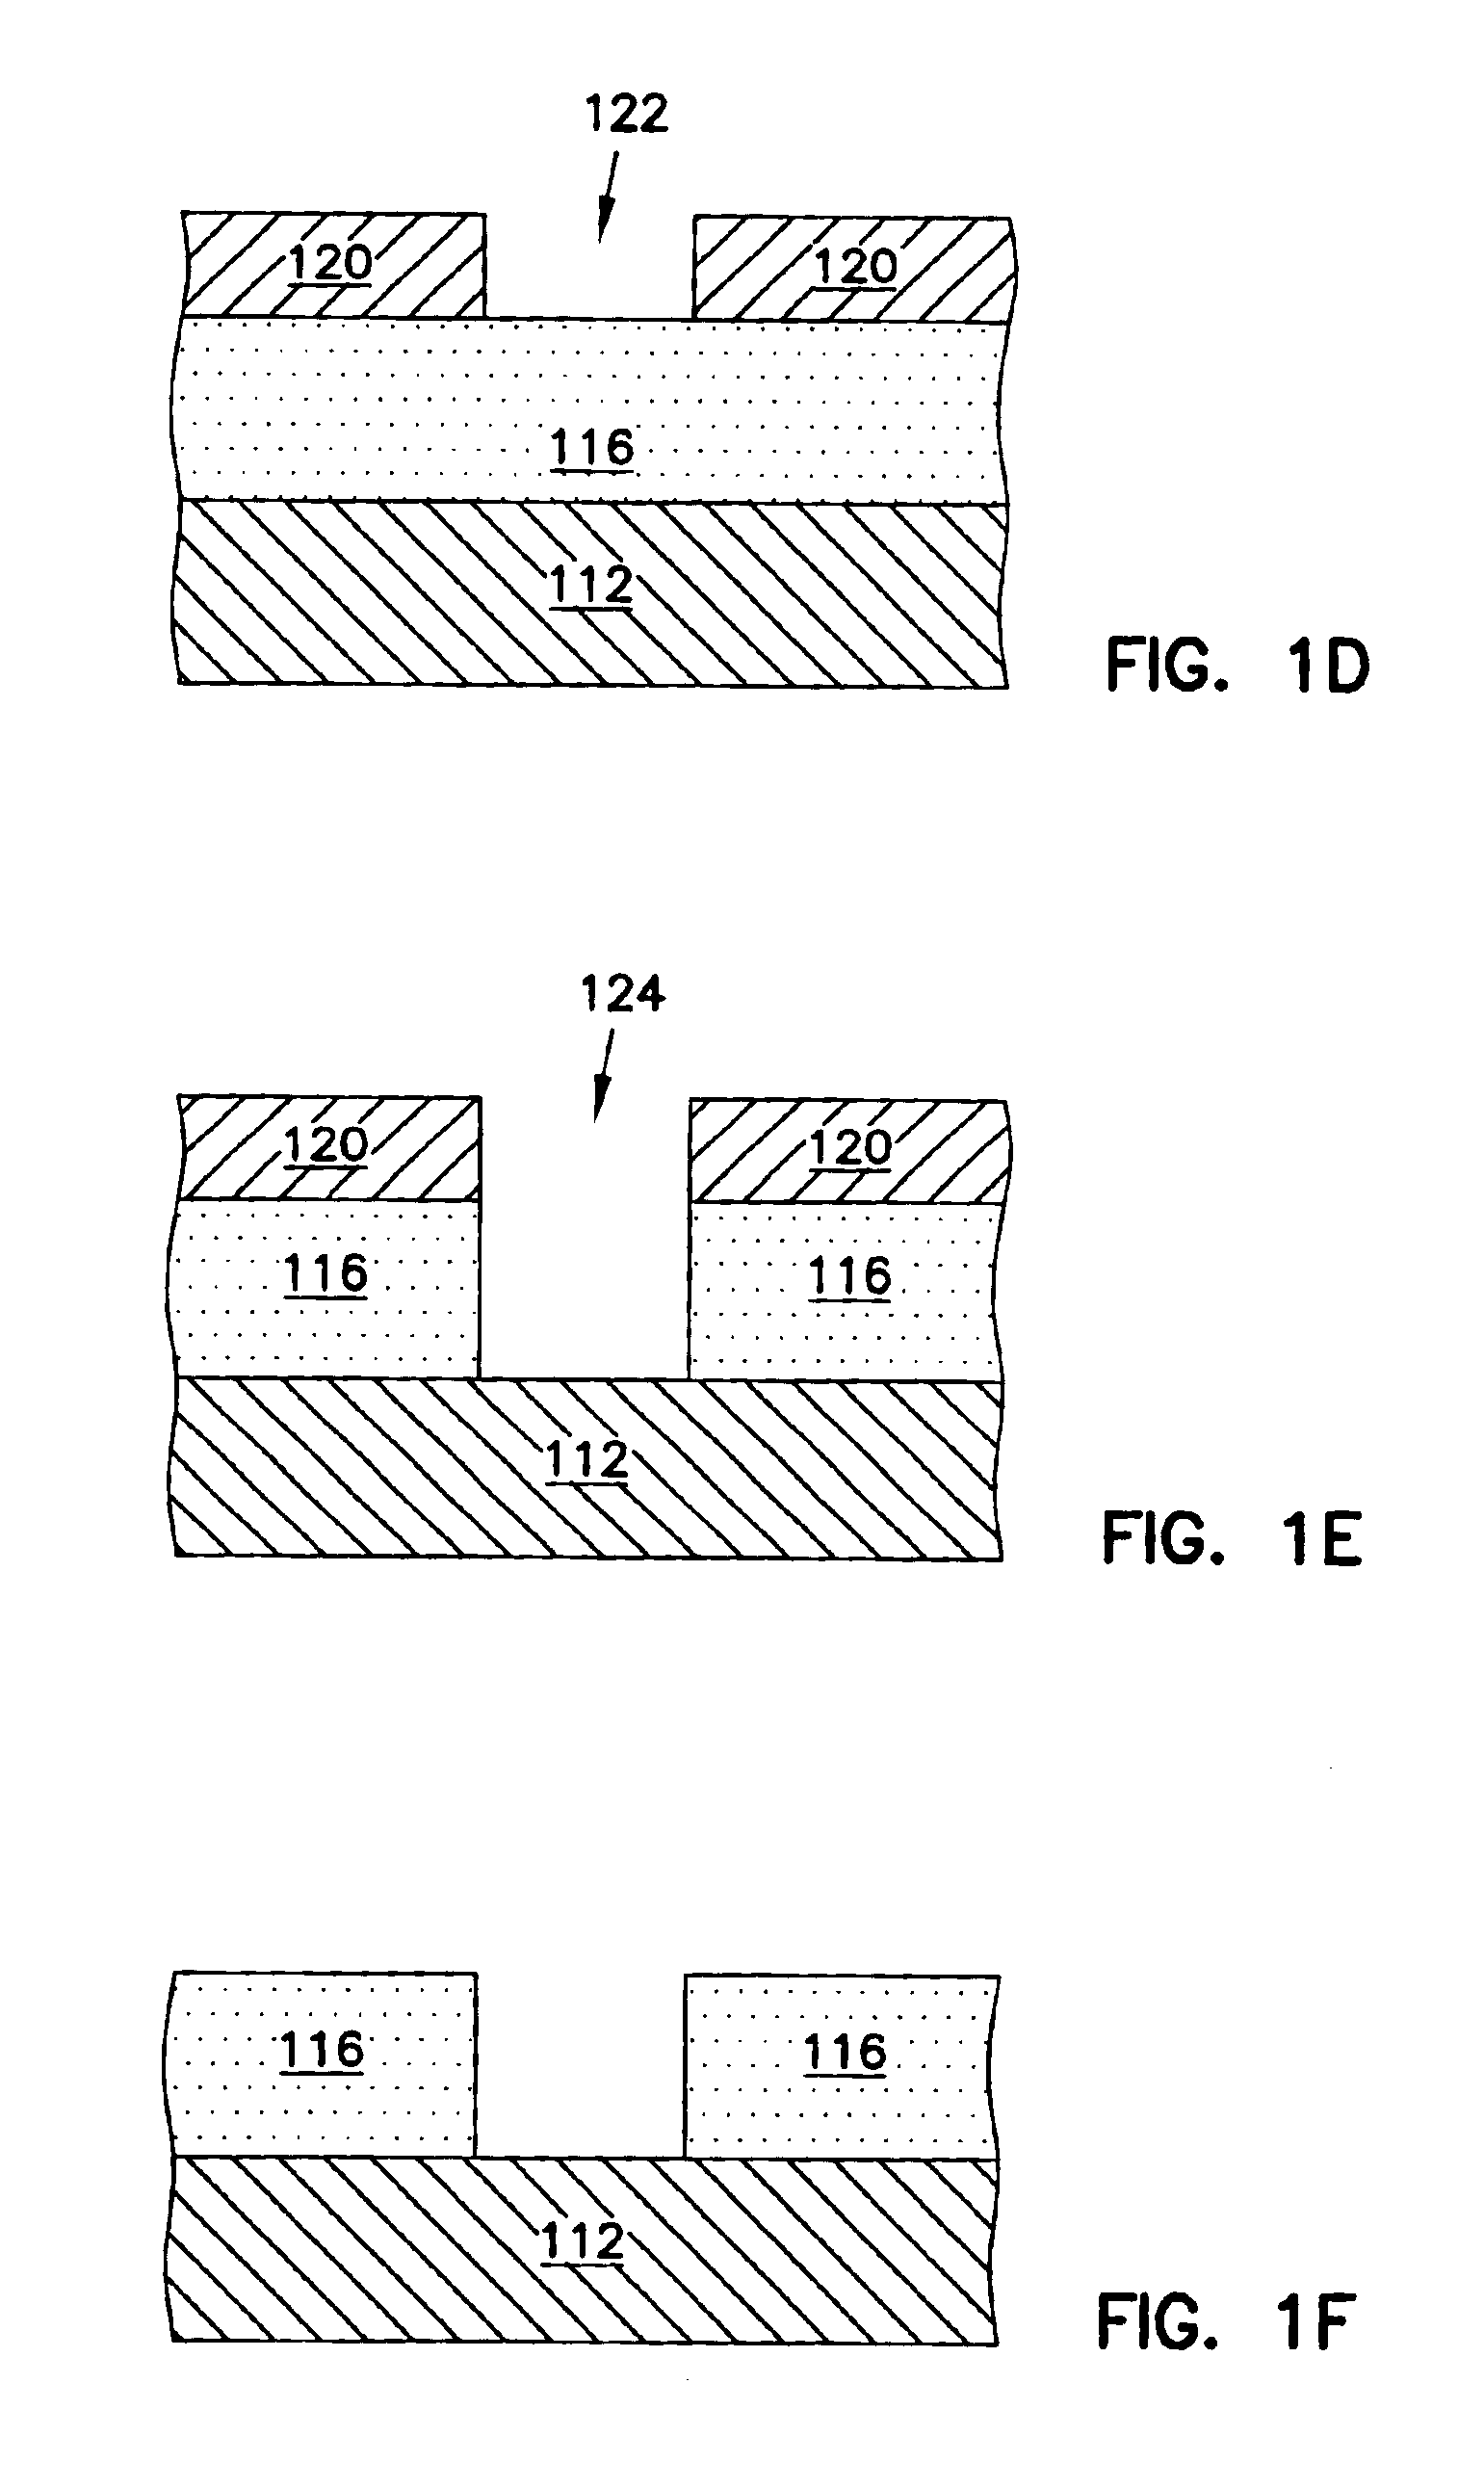 Polynorbornene foam insulation for integrated circuits